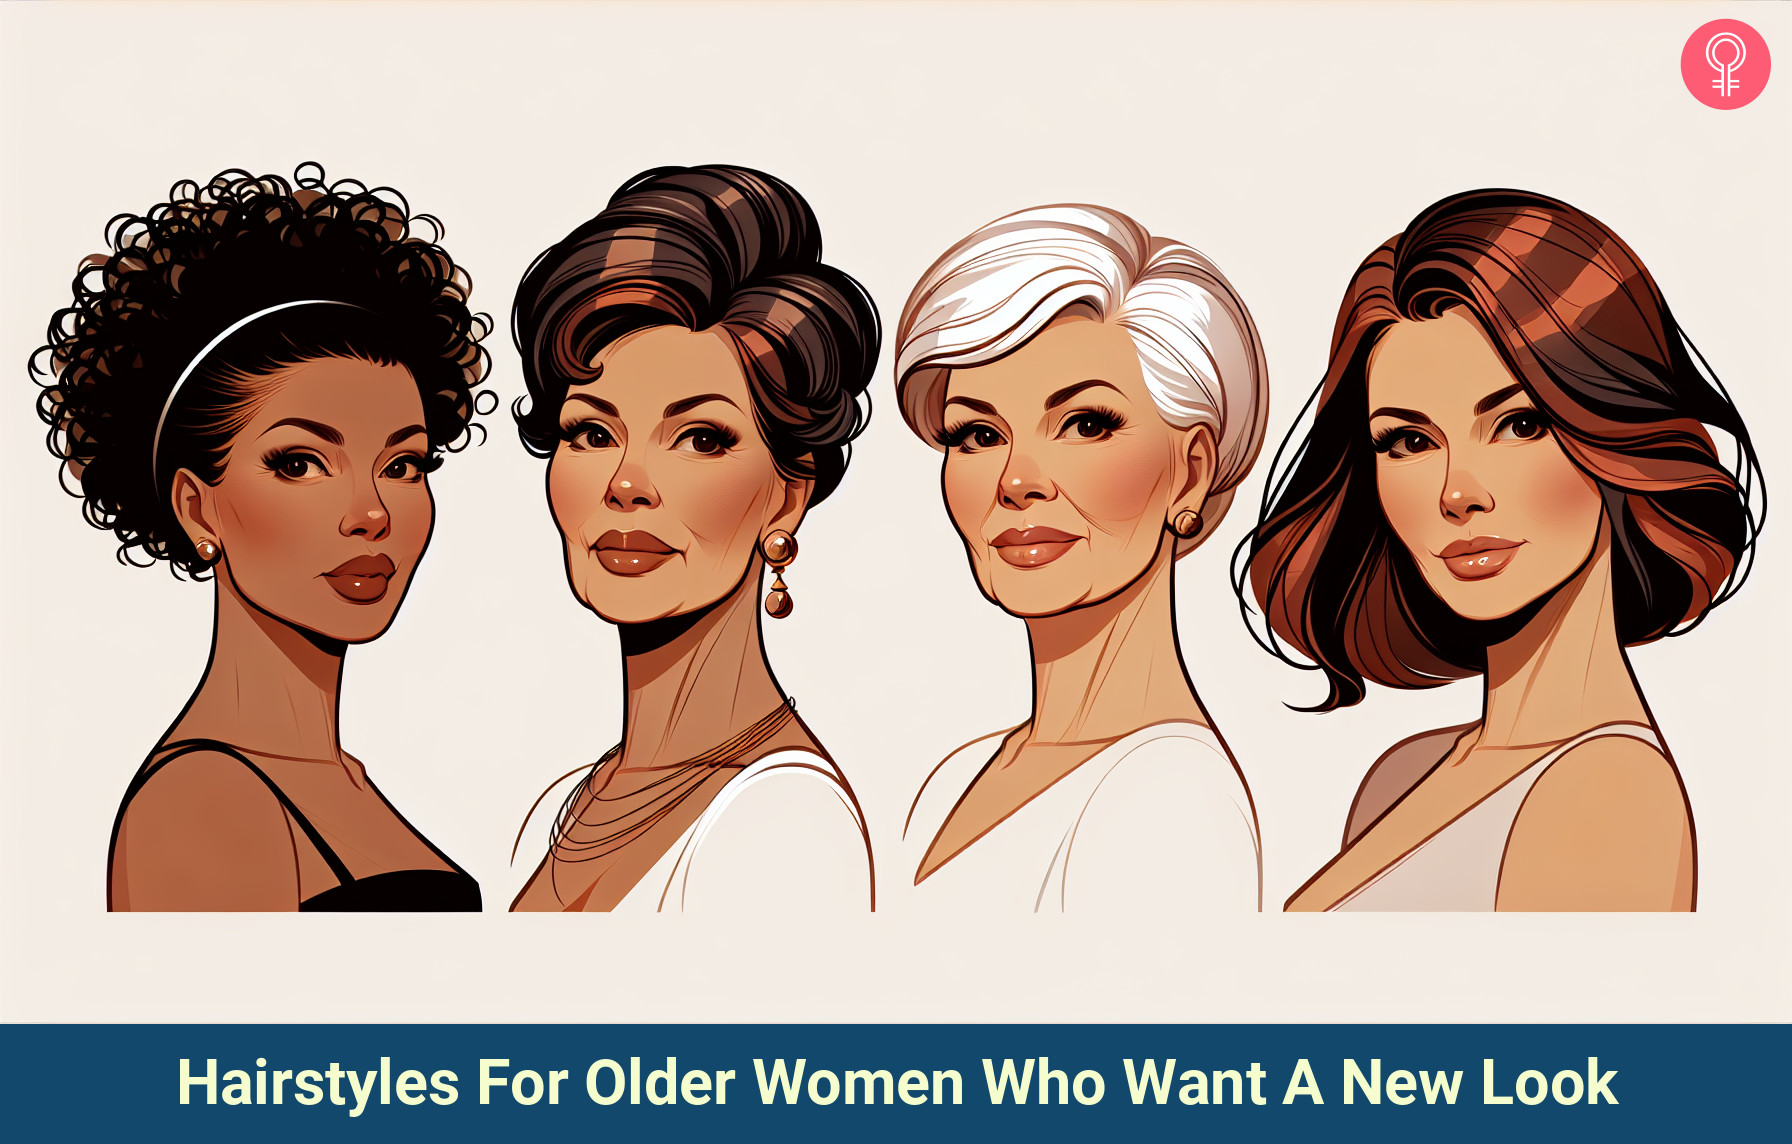 24 Hairstyles For Older Women Who Want A New Look